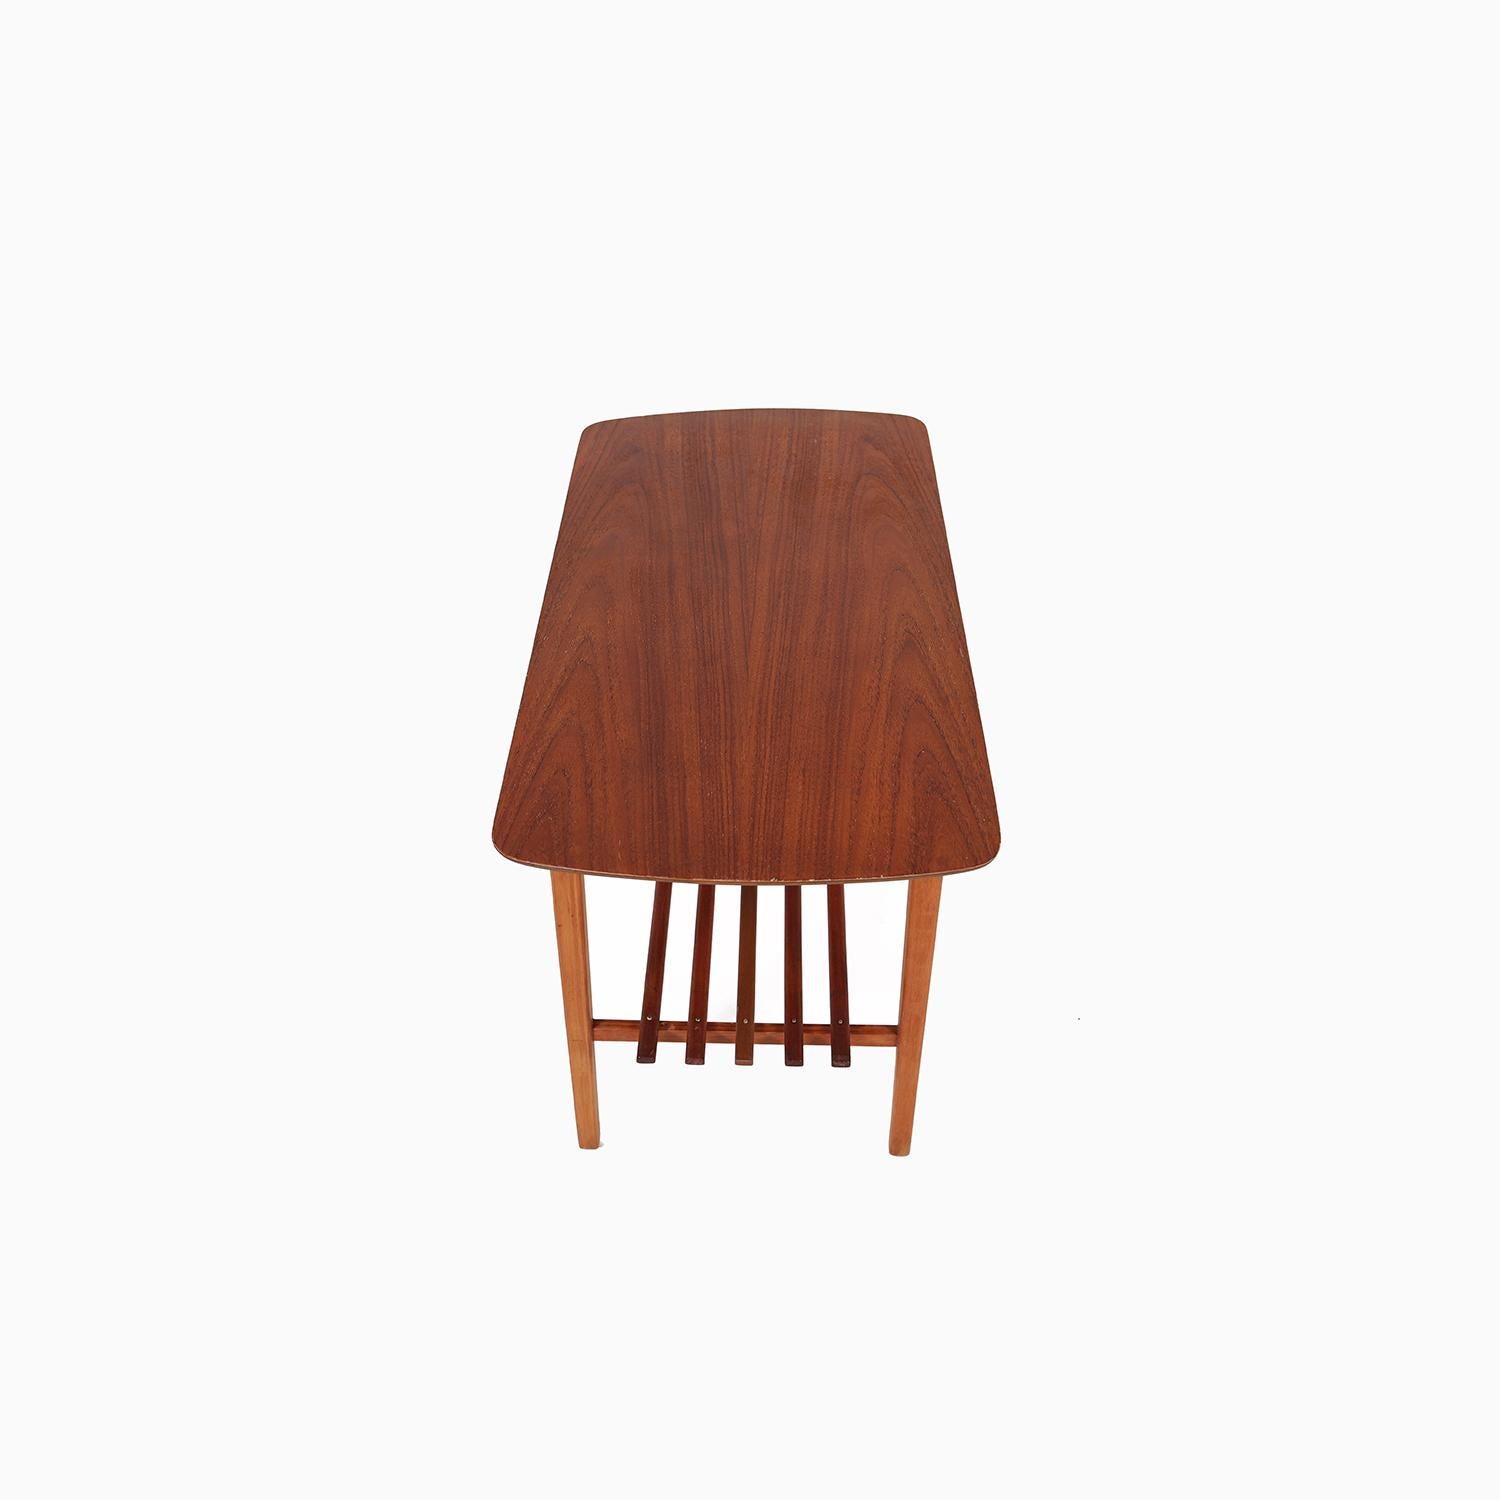 An interesting Danish Modern occasional table made from teak and pine. A design that features the newer methods of the period by using an exposed beveled ply top with an oiled teak veneer. Base is constructed using pine that gives the table visual